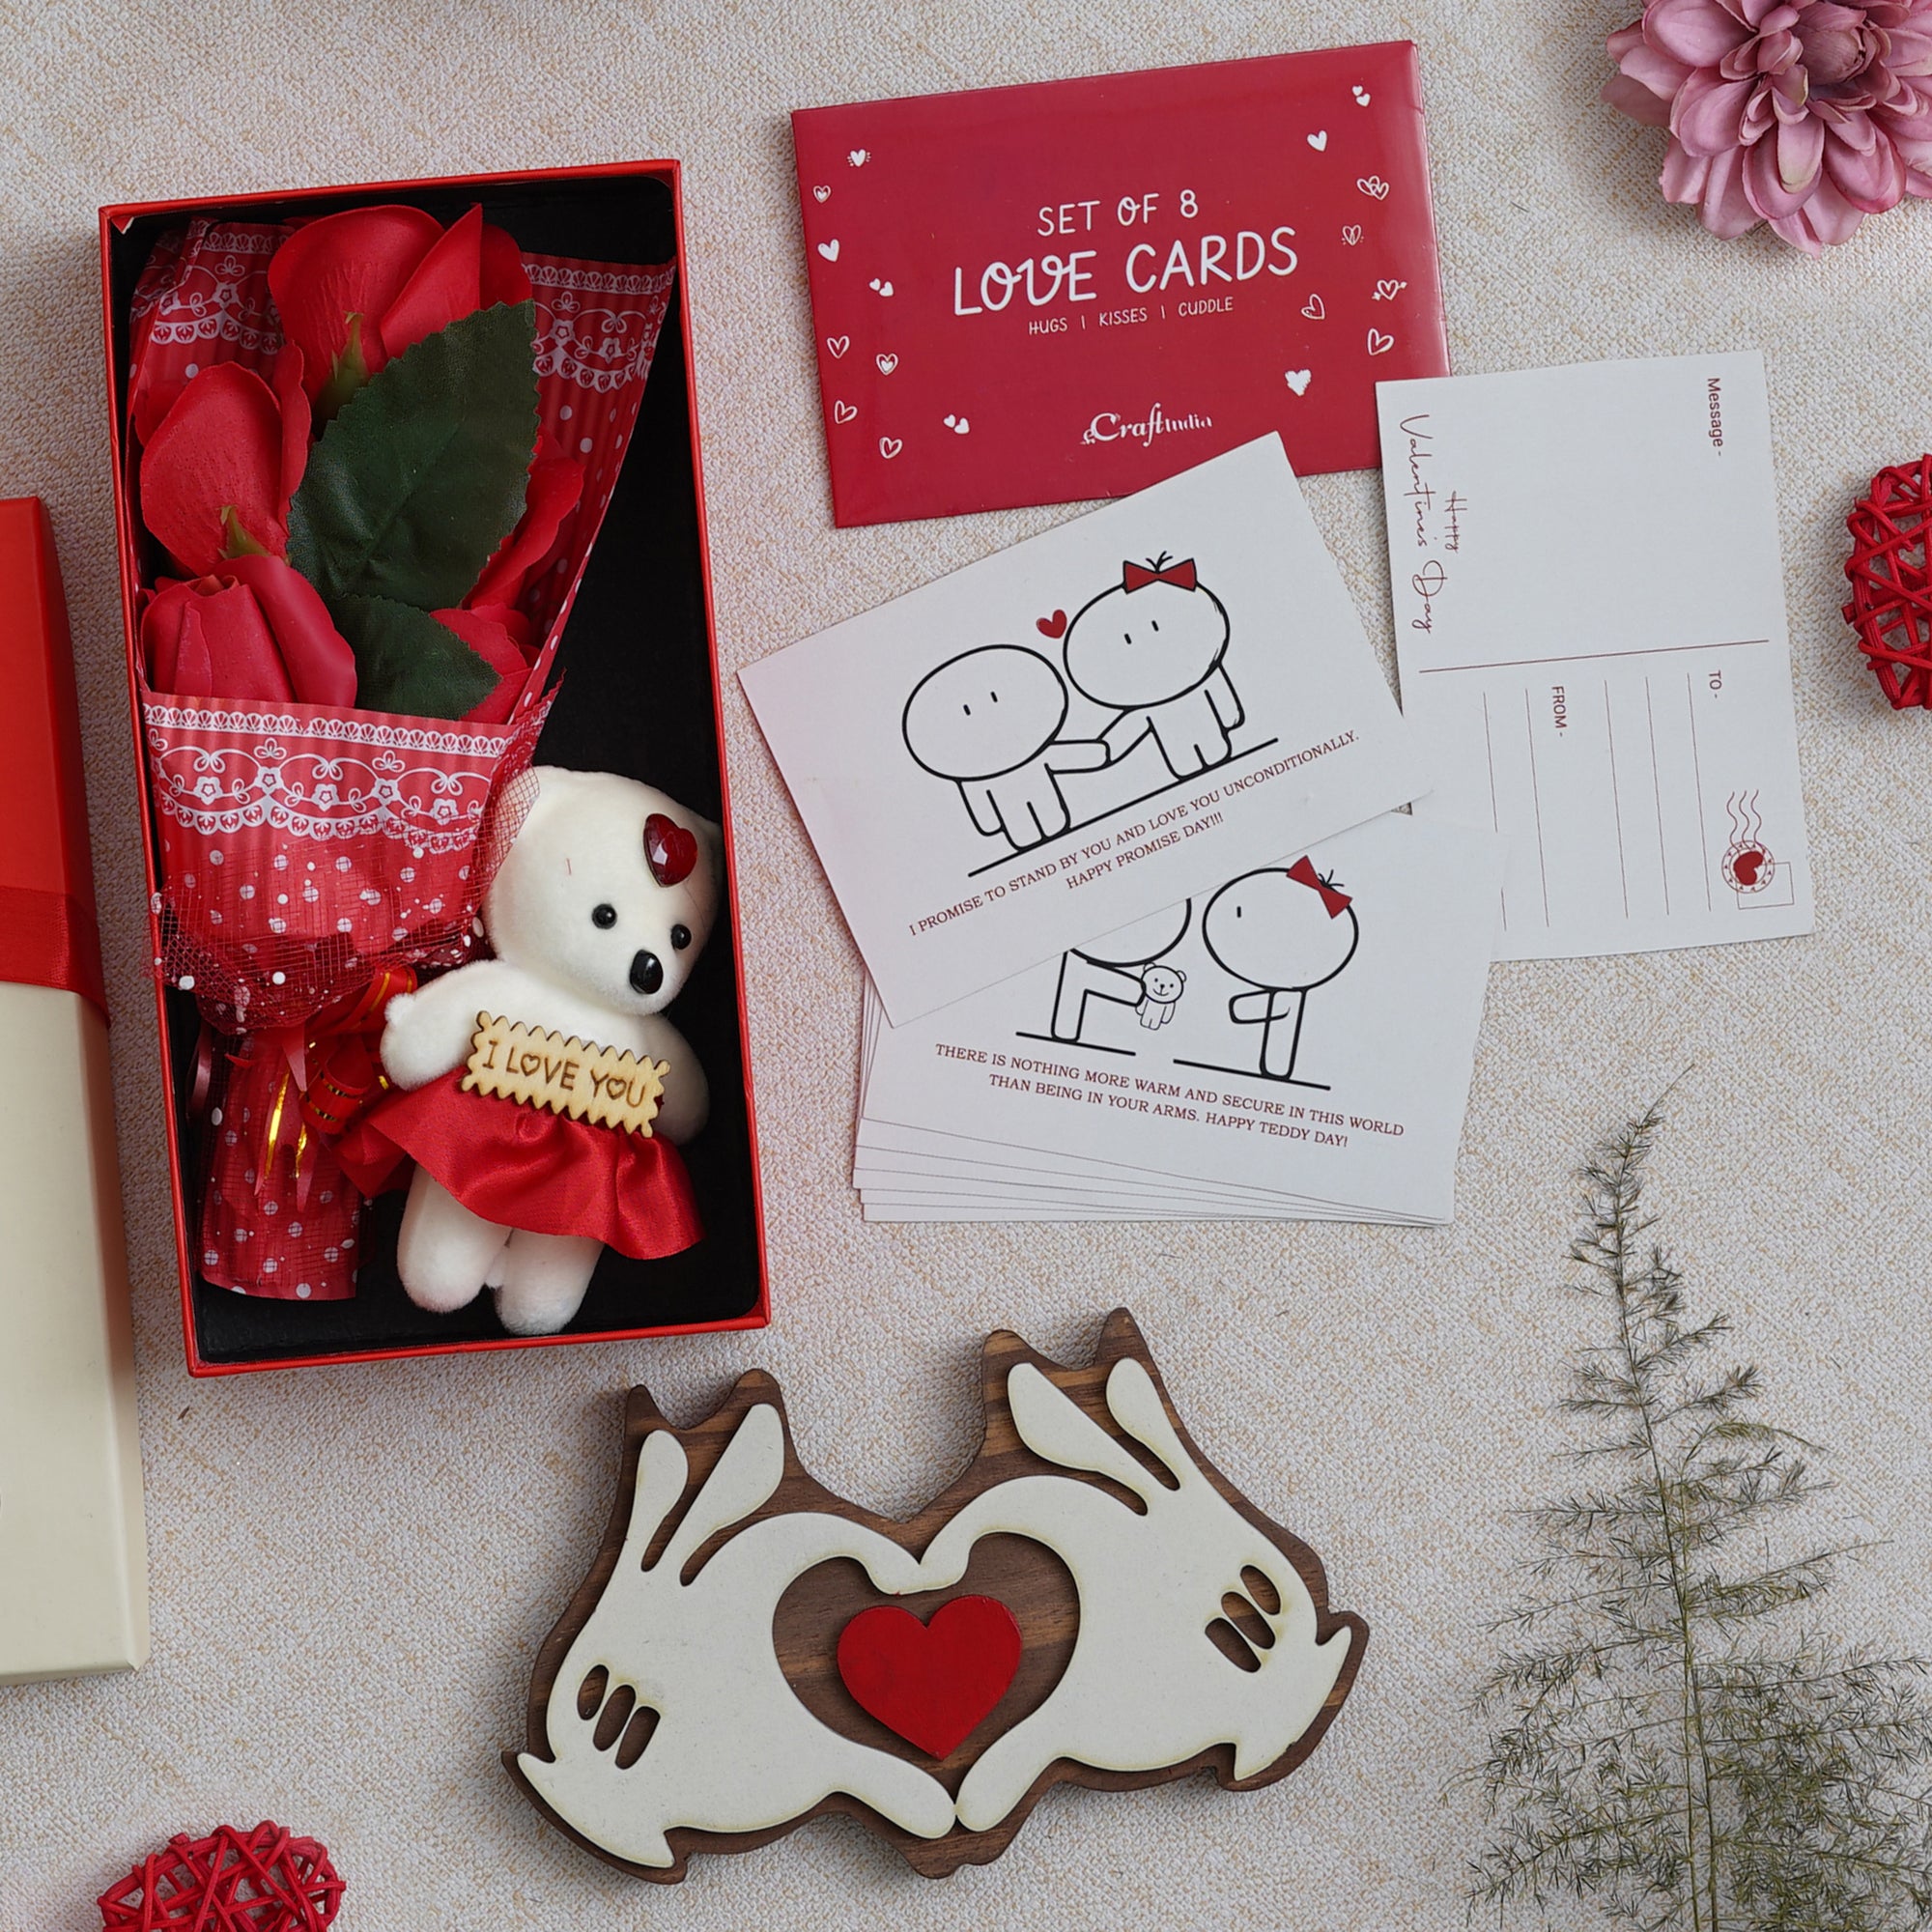 Valentine Combo of Pack of 8 Love Gift Cards, Hands Showcasing Red Heart Gift Set, Red Roses Bouquet and White, Red Teddy Bear Valentine's Rectangle Shaped Gift Box